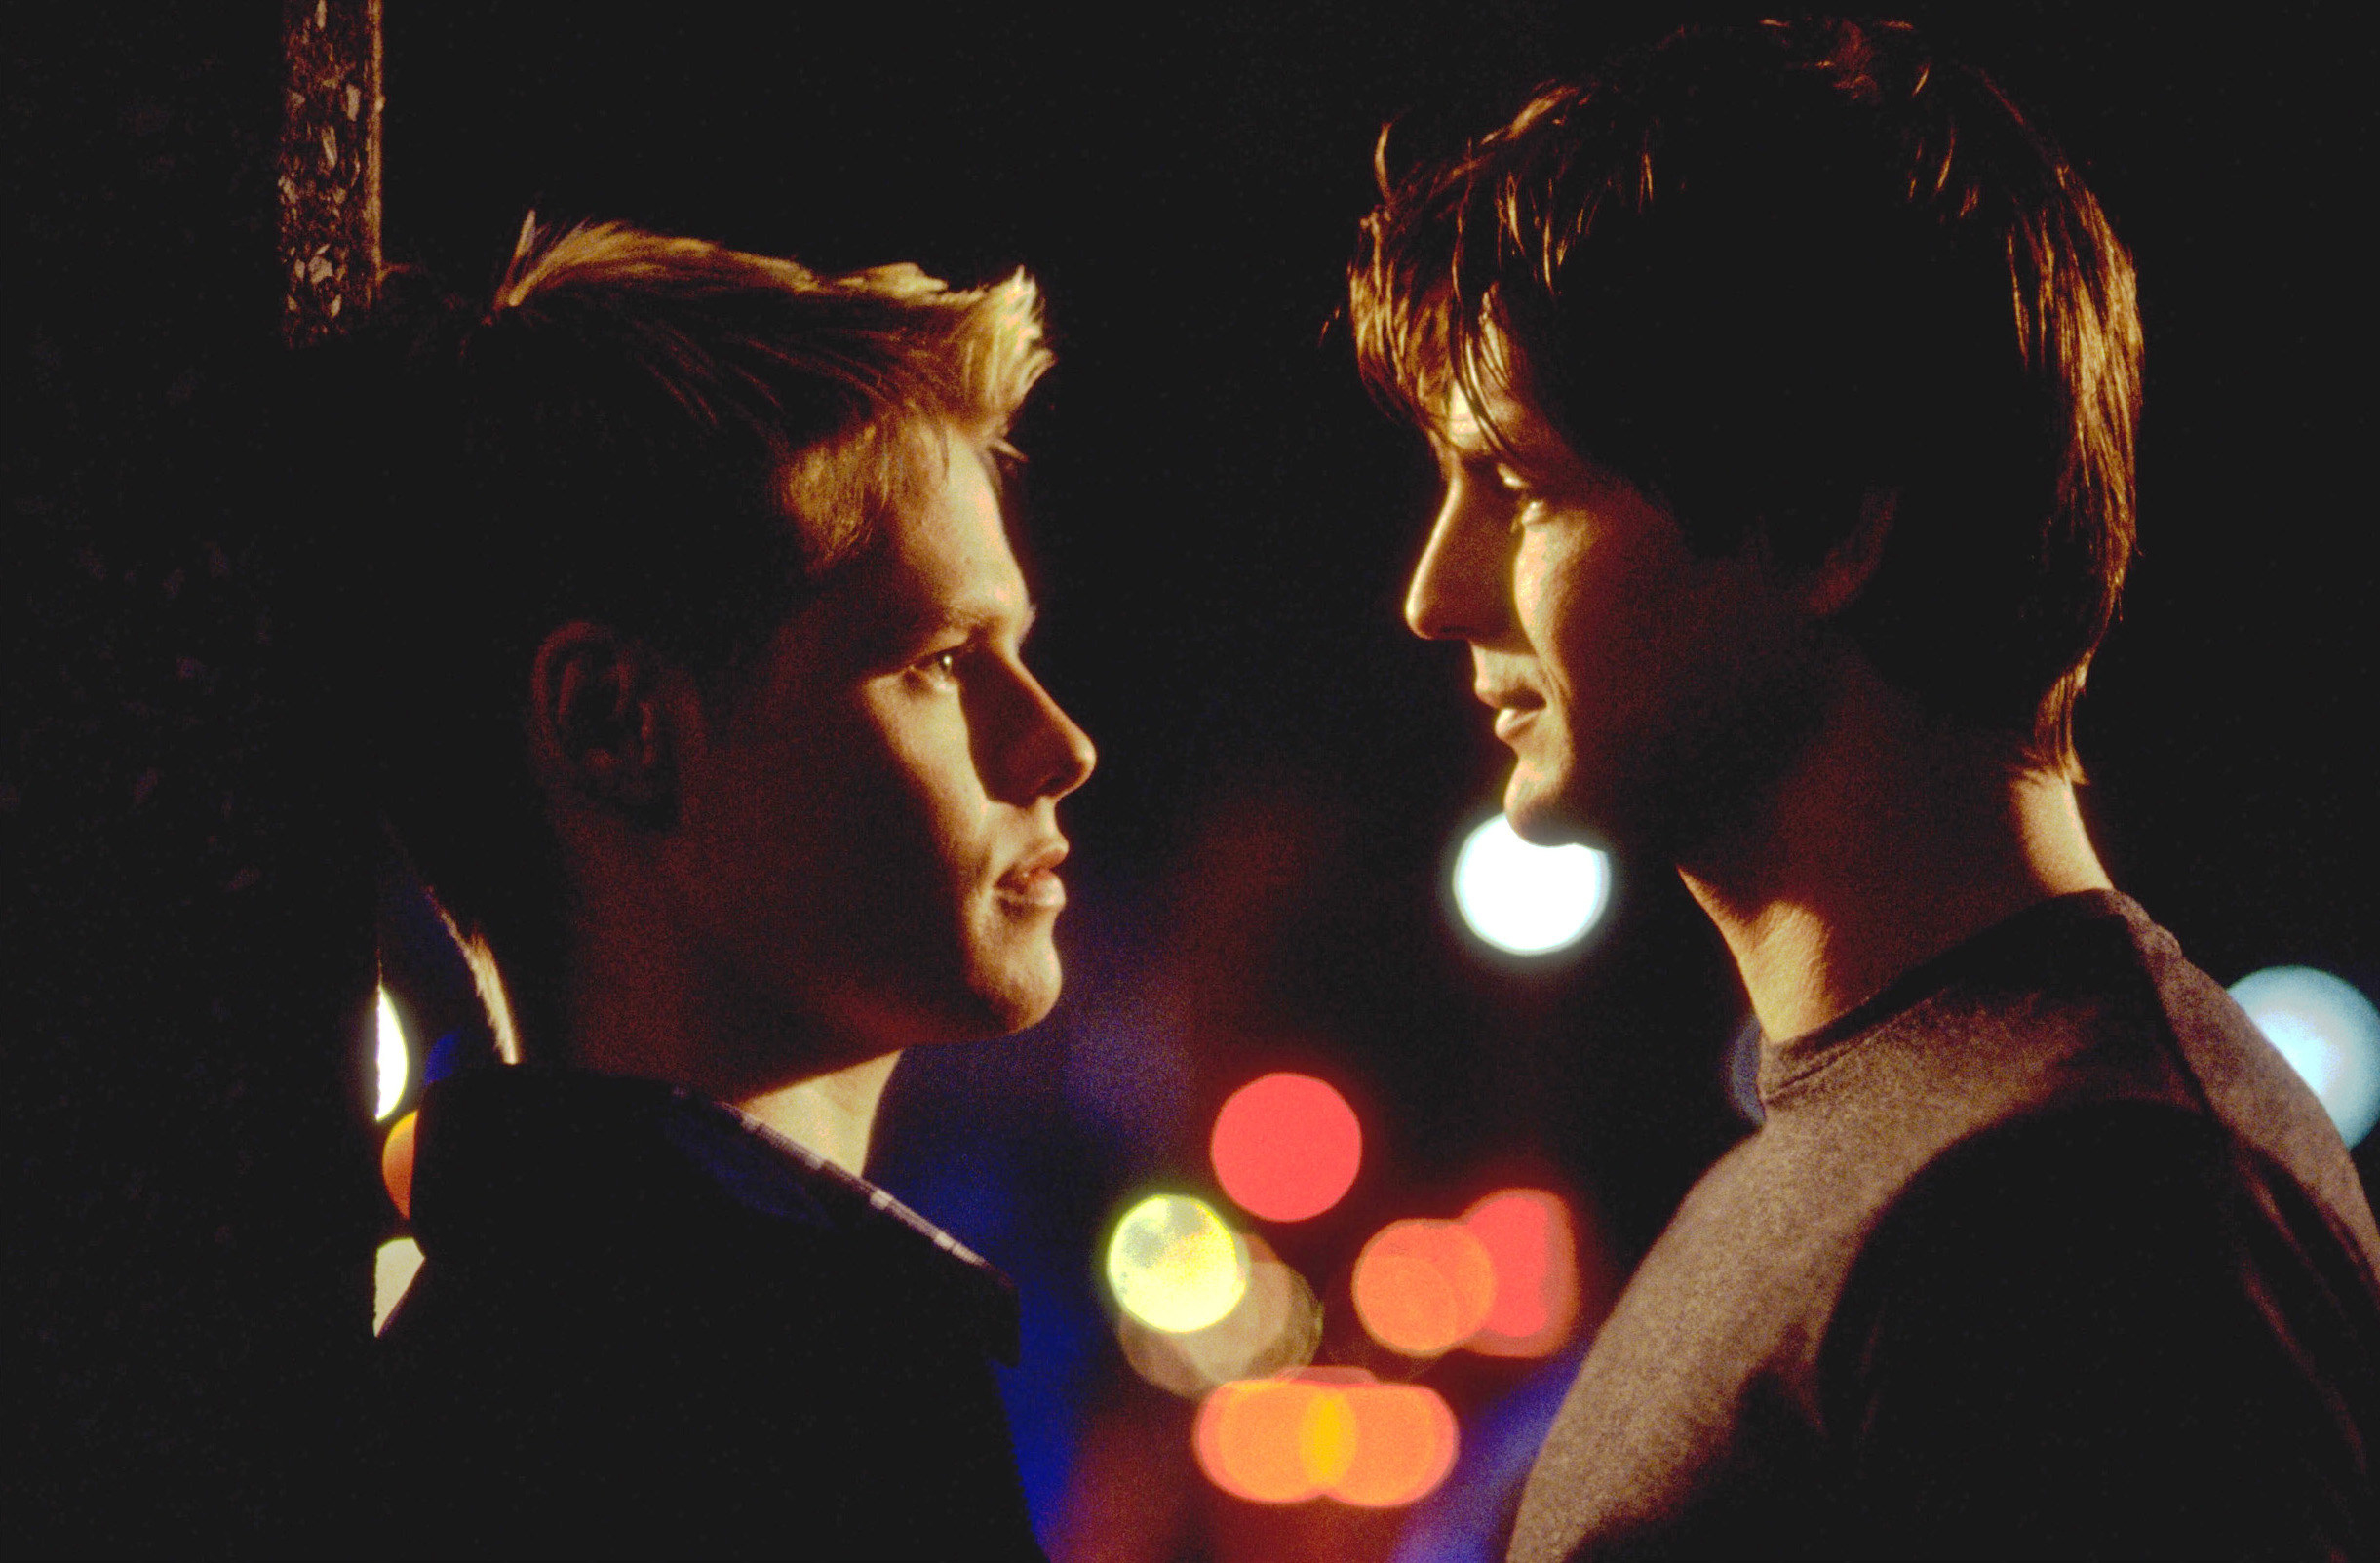 Actors Randy Harrison and Gale Harold in a still from the series Queer as Folk